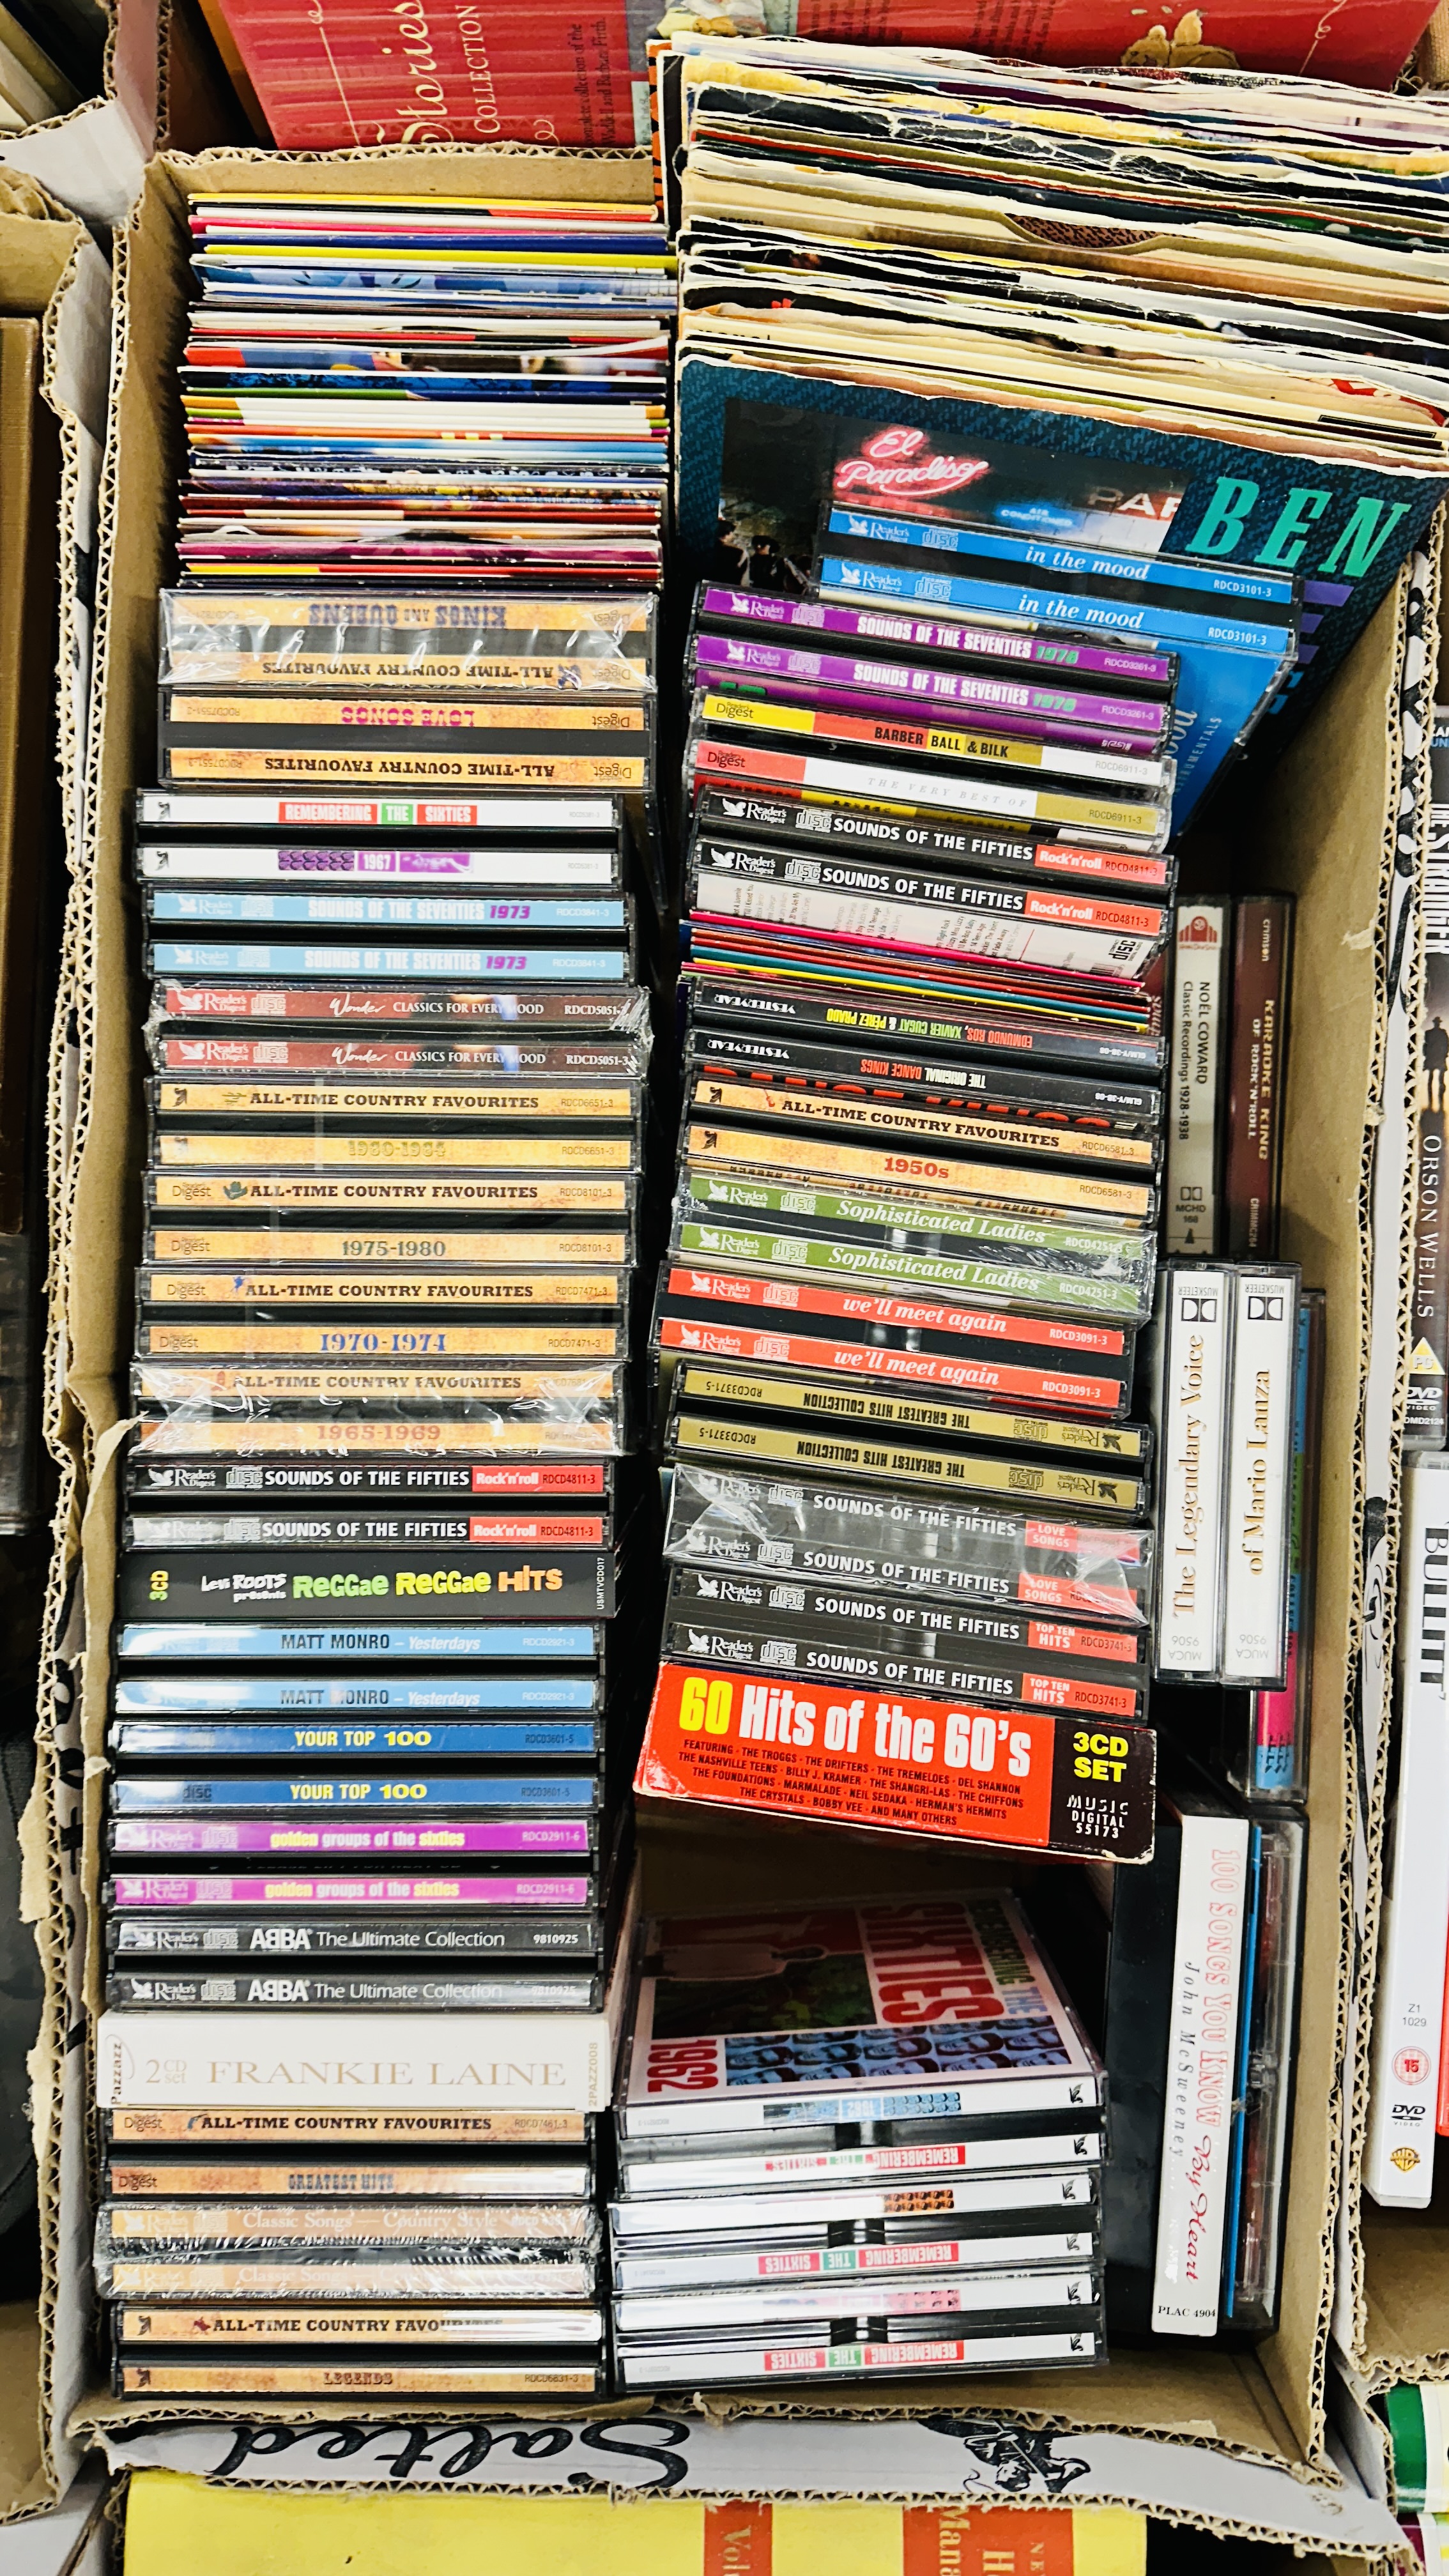 12 X BOXES BOOKS, CD'S RECORDS, CASSETTES AND DVD'S. - Image 9 of 14